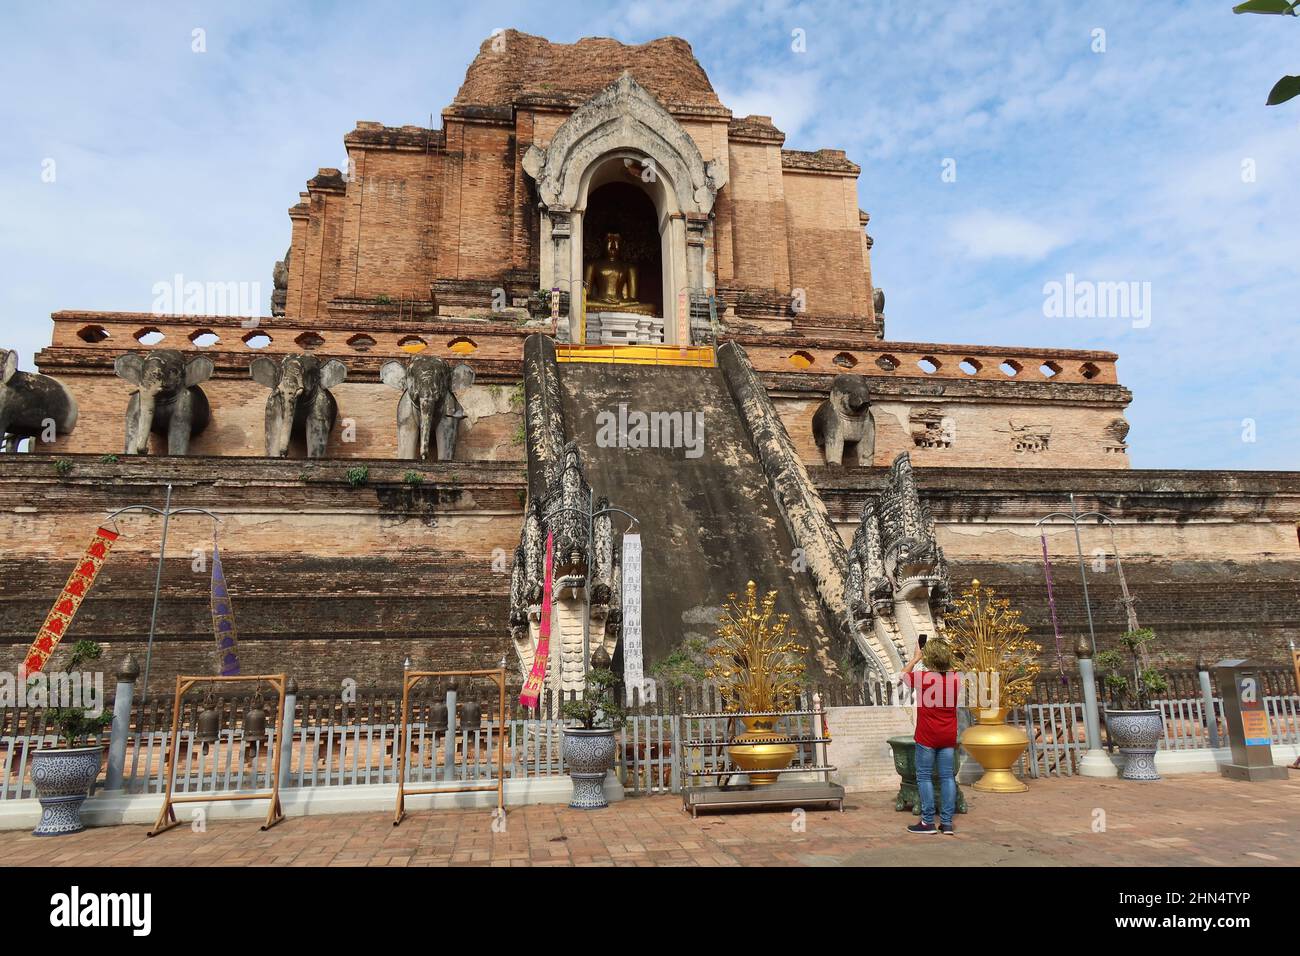 Tourist taking a photograph  in front of Wat Chedi Luang, Chiang Mai, Thailand Stock Photo